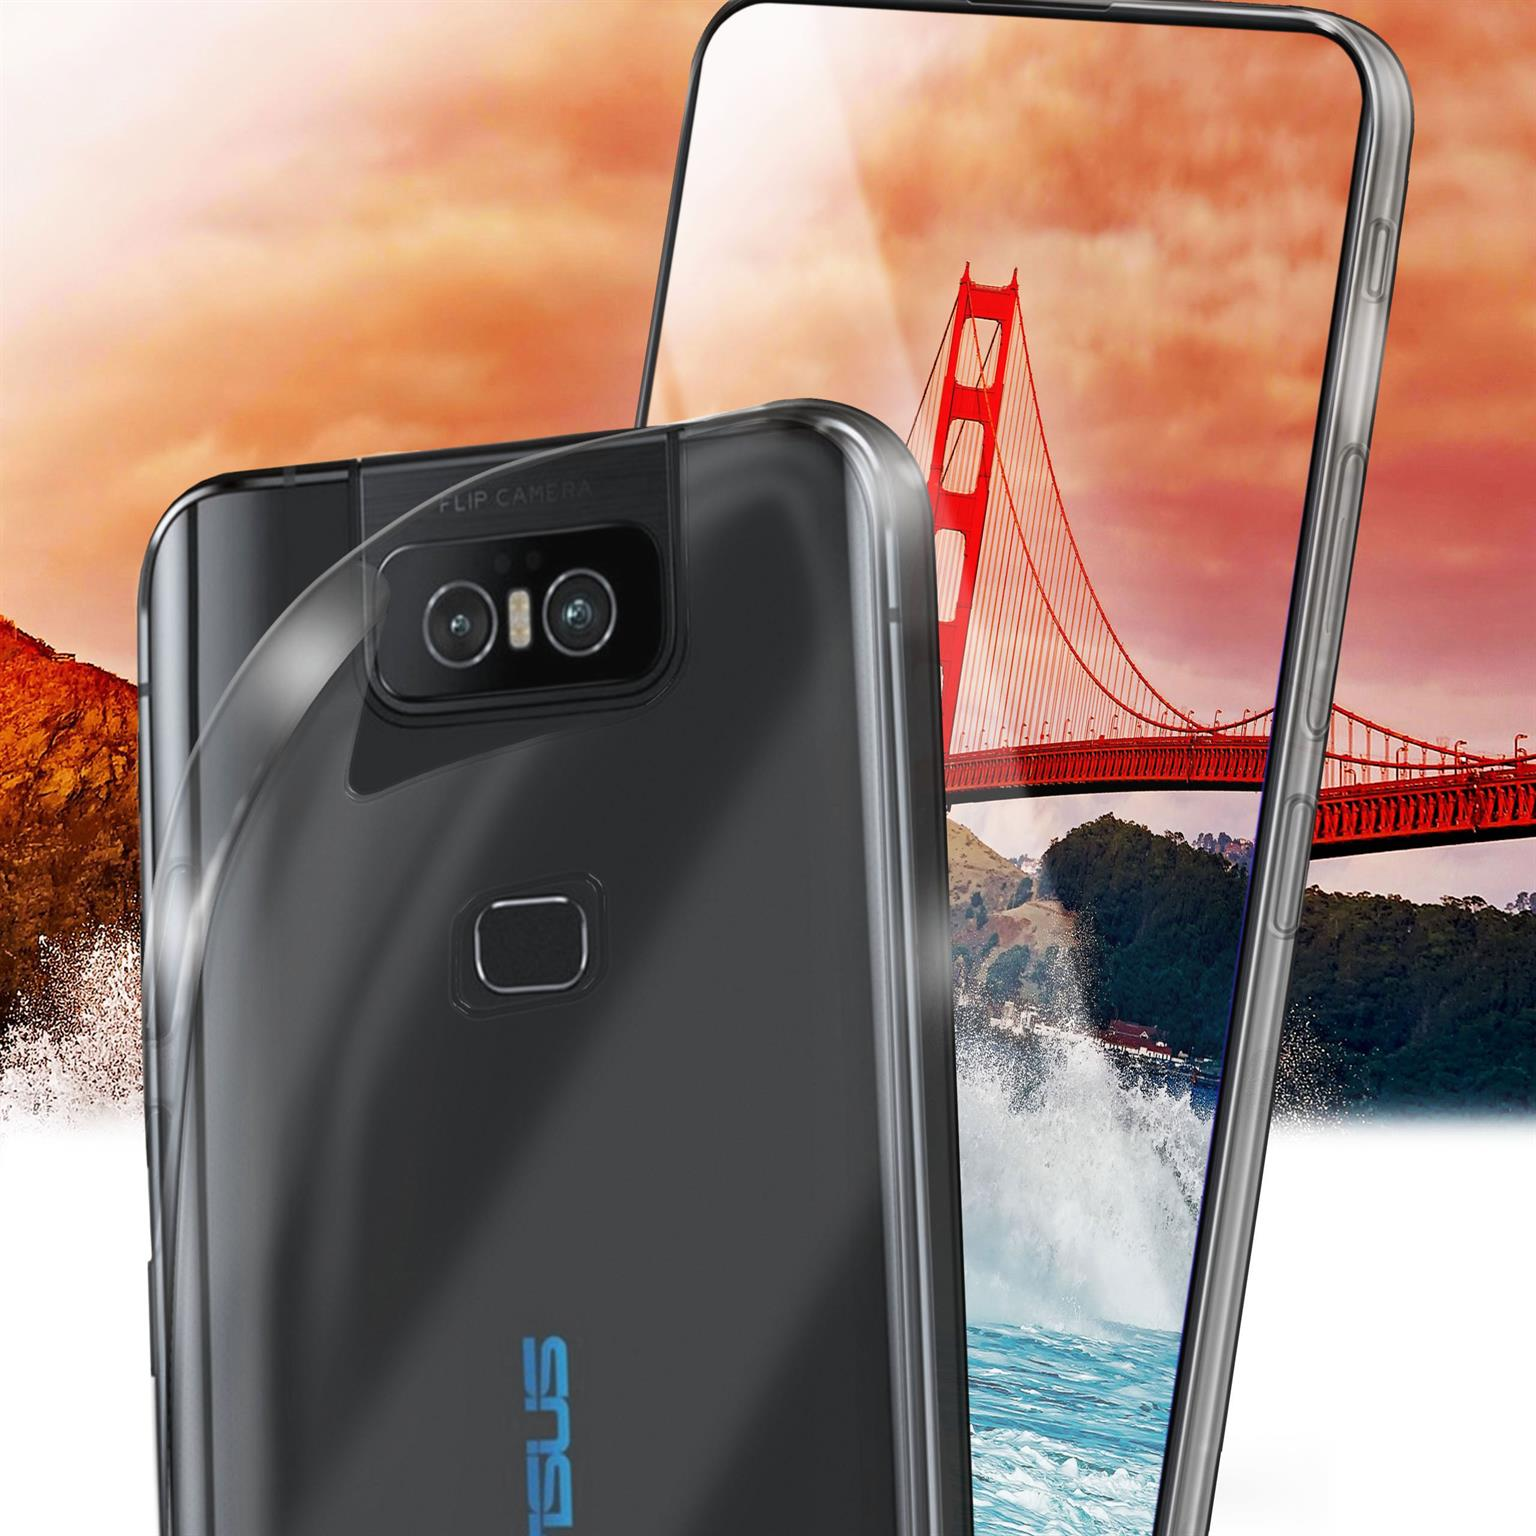 MOEX Aero Case, Backcover, ASUS, (2019), Zenfone 6 Asus Crystal-Clear